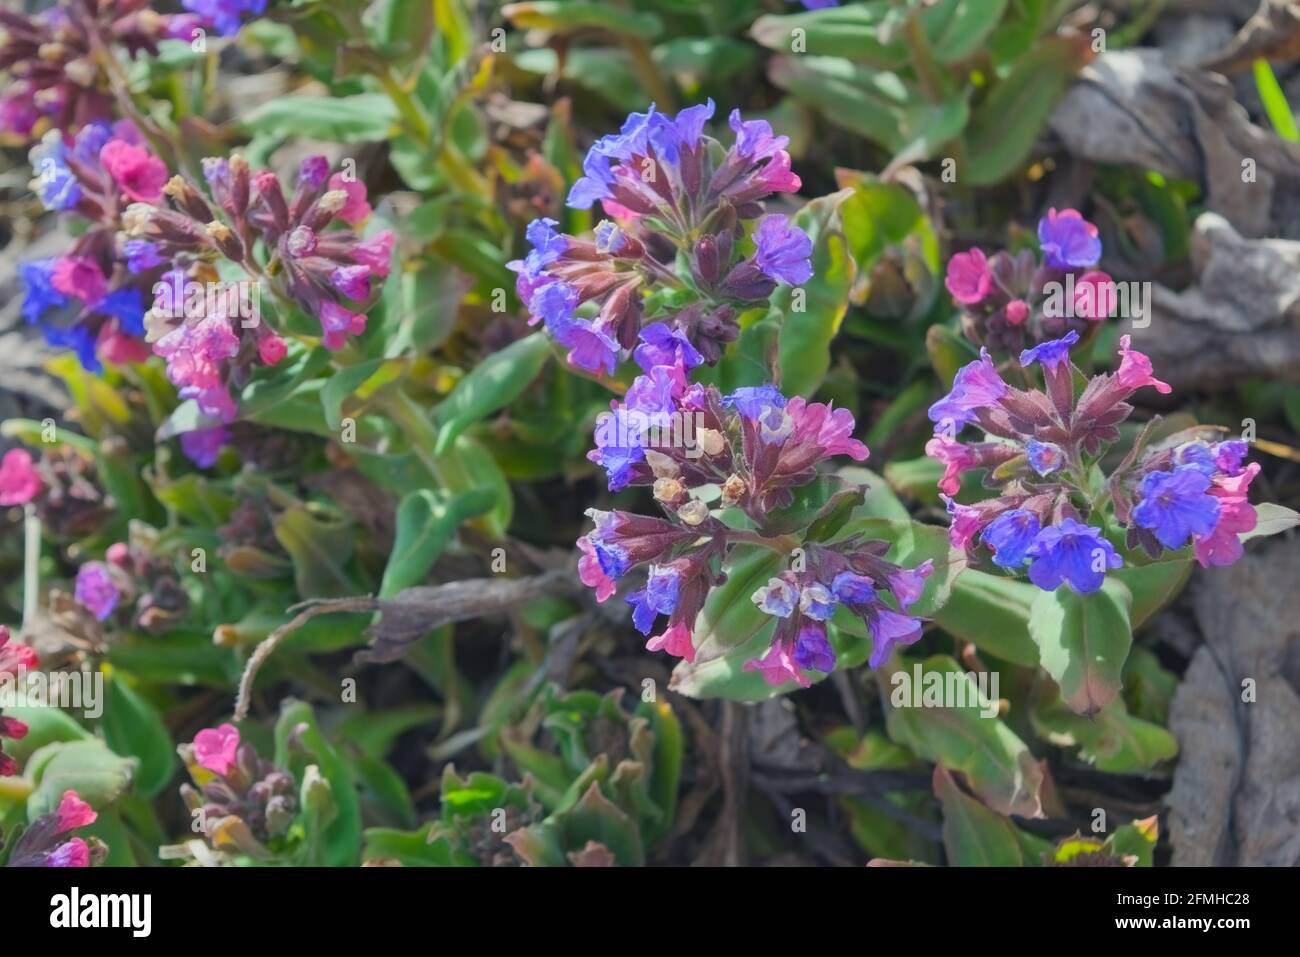 Pulmonaria officinalis in bloom, early springtime flowering herb, group of pink purple and blue violet flowers with leaves close up Stock Photo